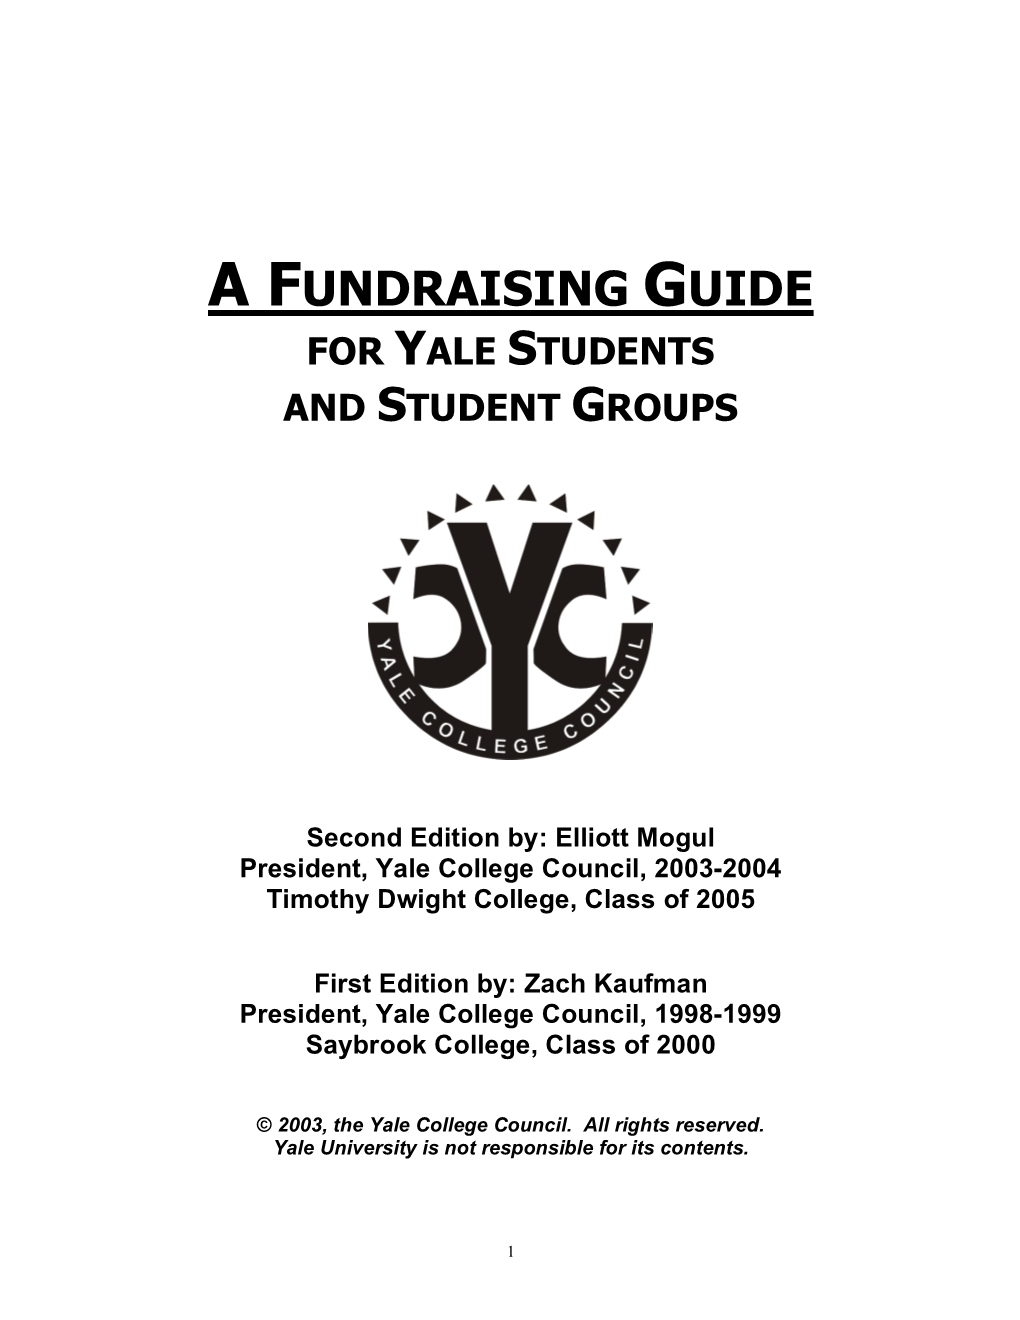 A Fundraising Guide for Yale Students and Student Groups